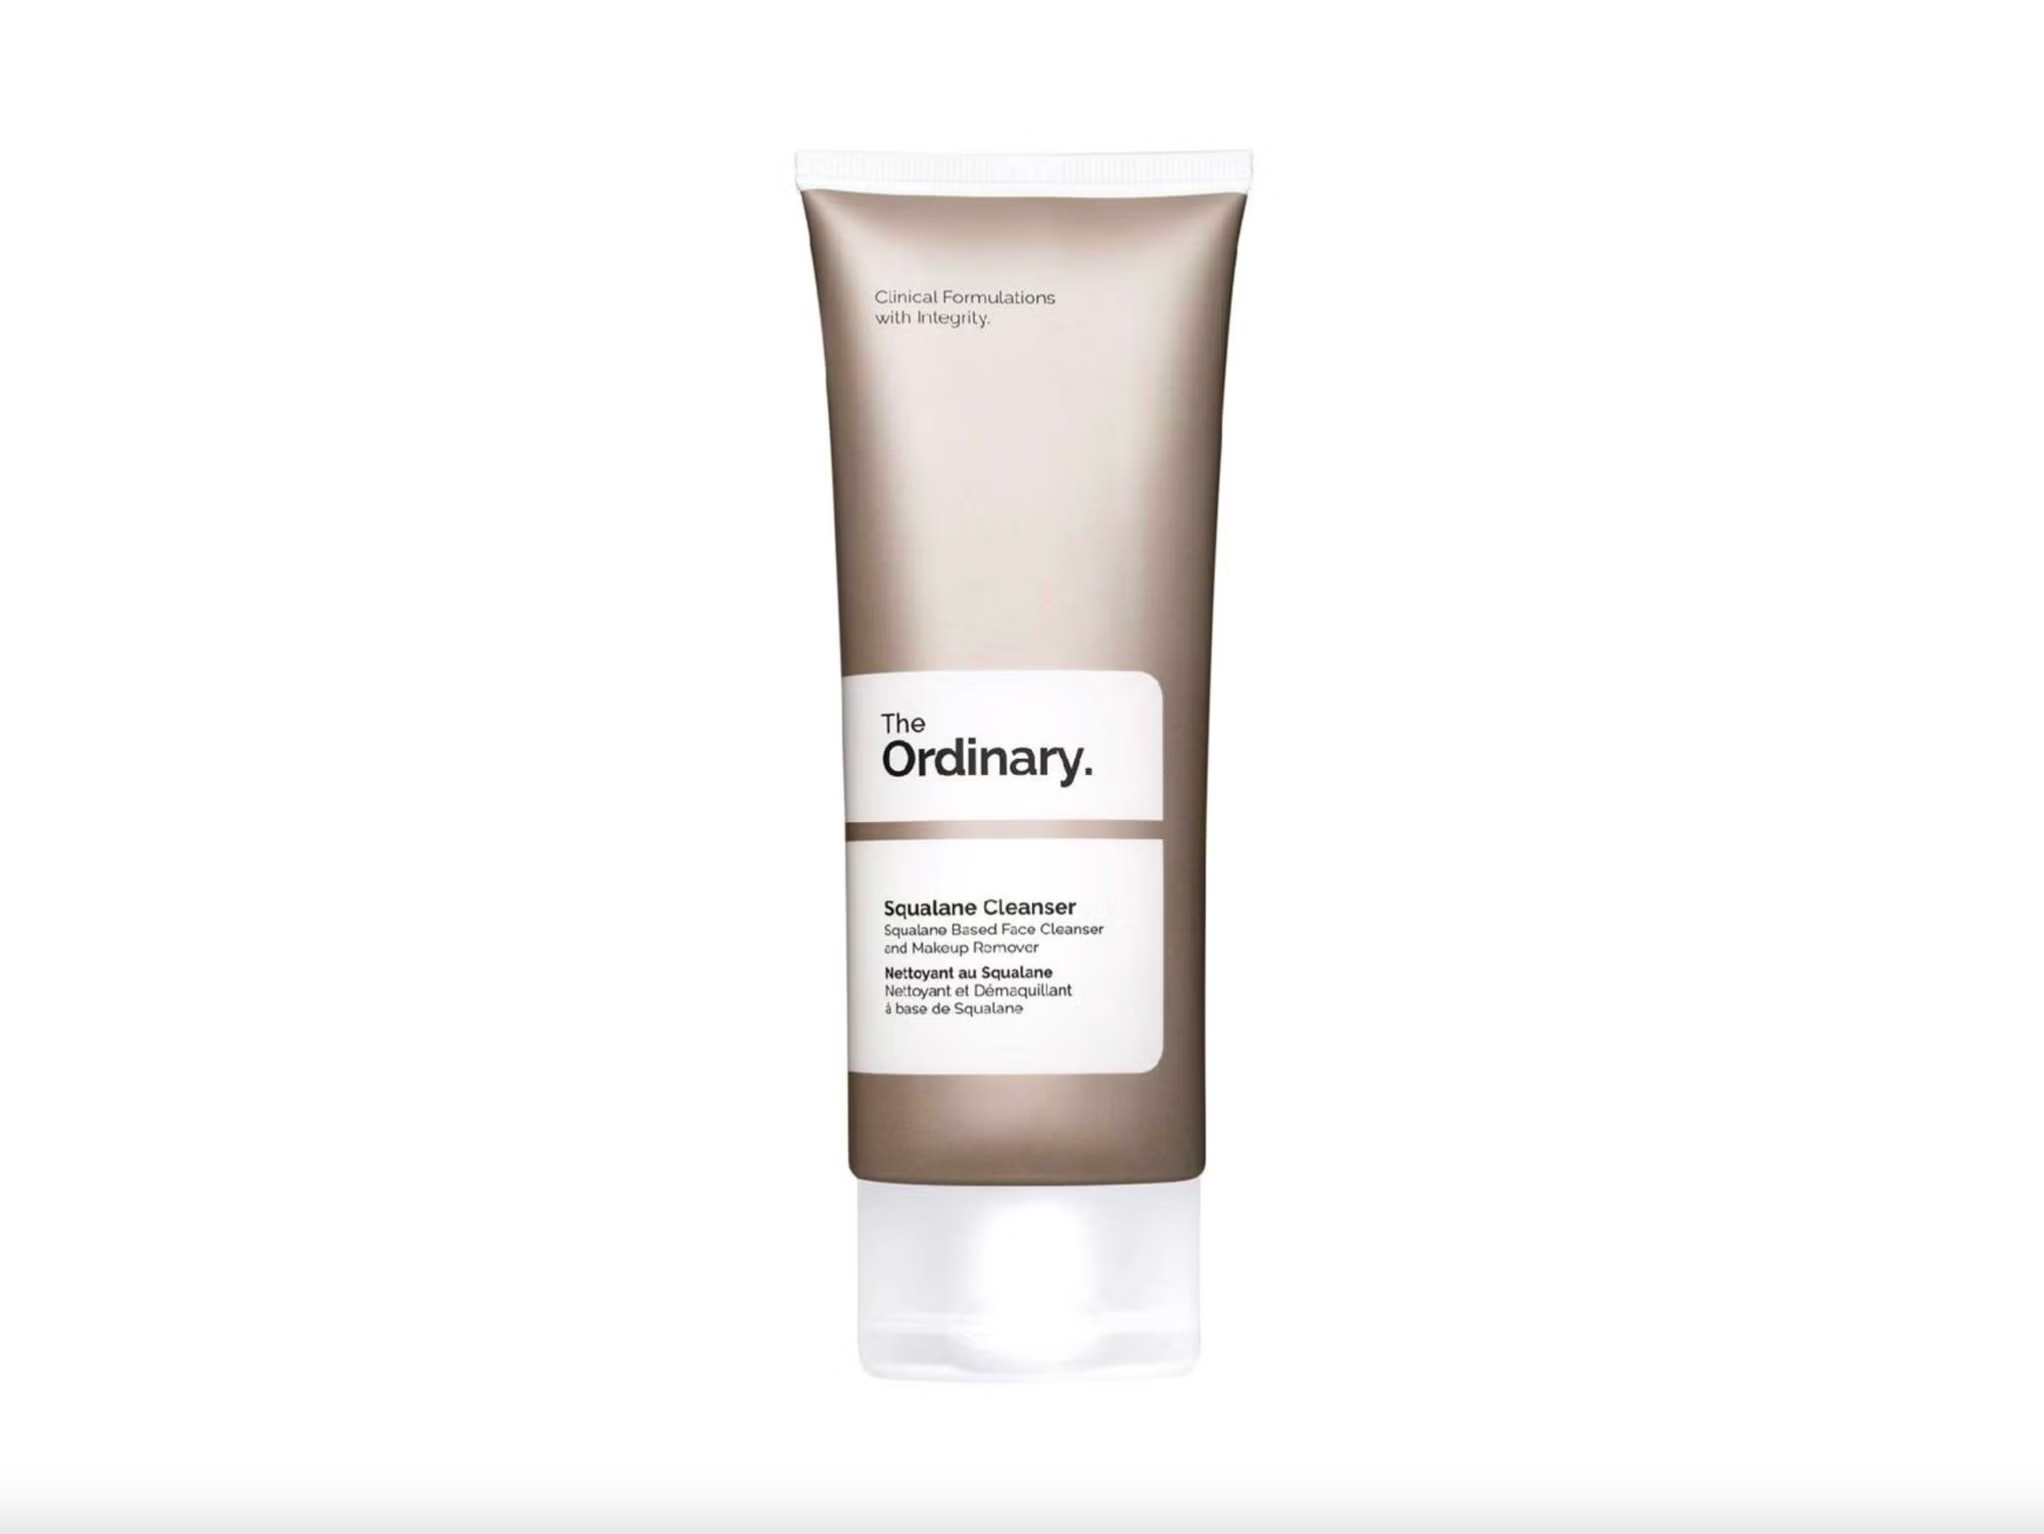 This creamy cleanser leaves skin soft and supple.